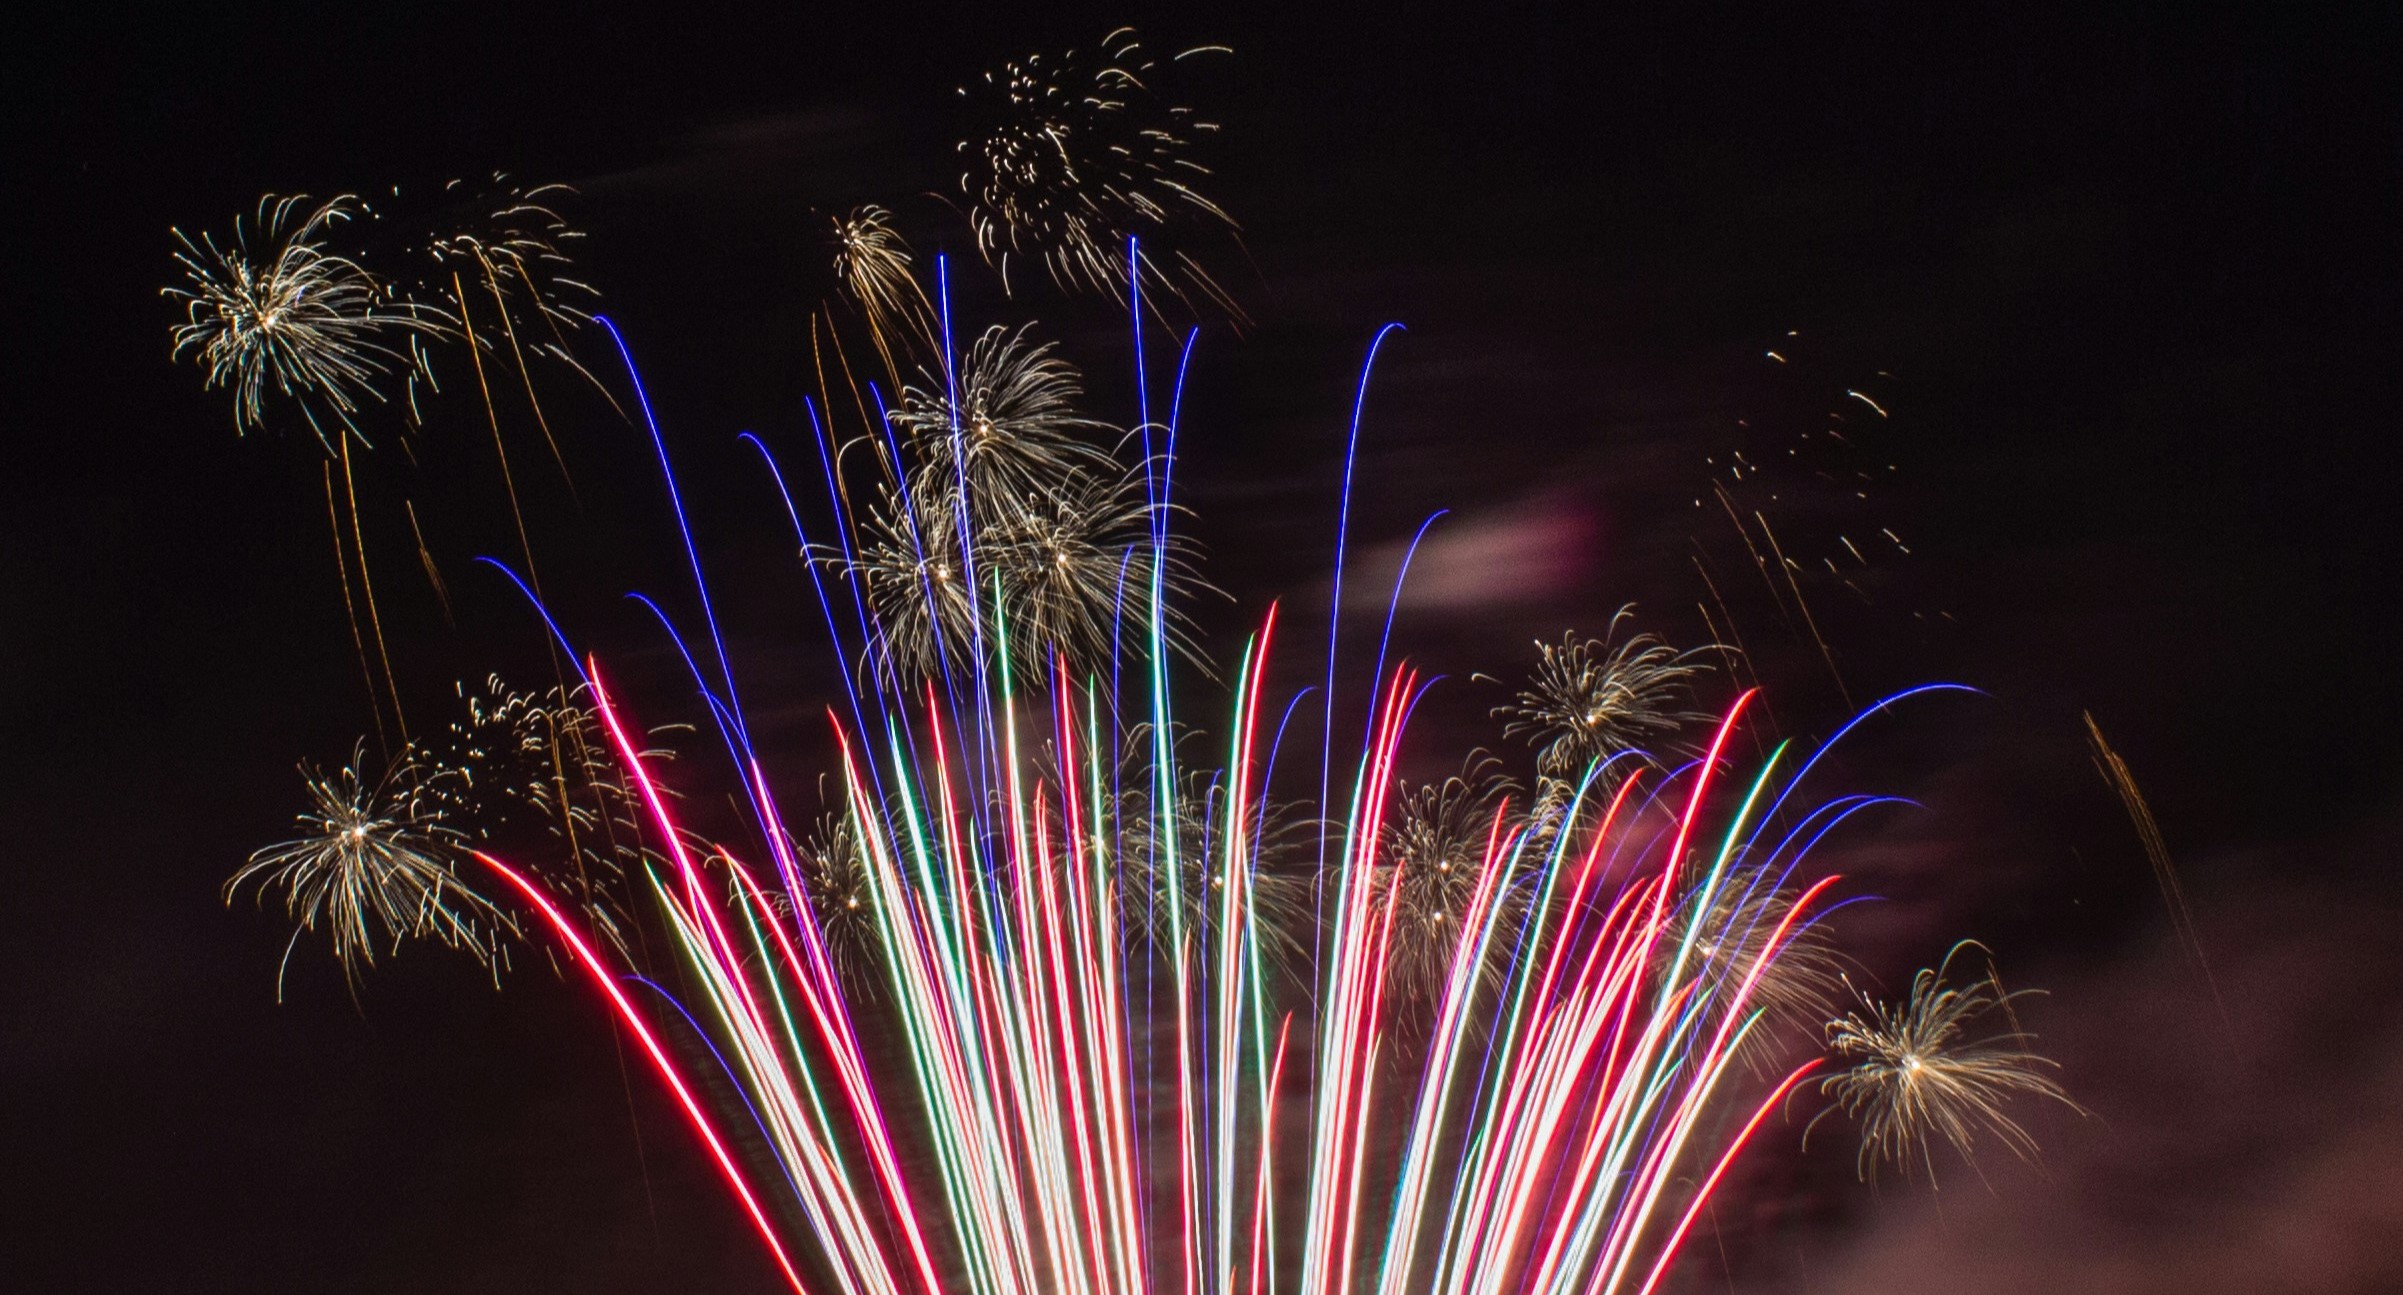 Red, white and blue fireworks exploding in the sky.